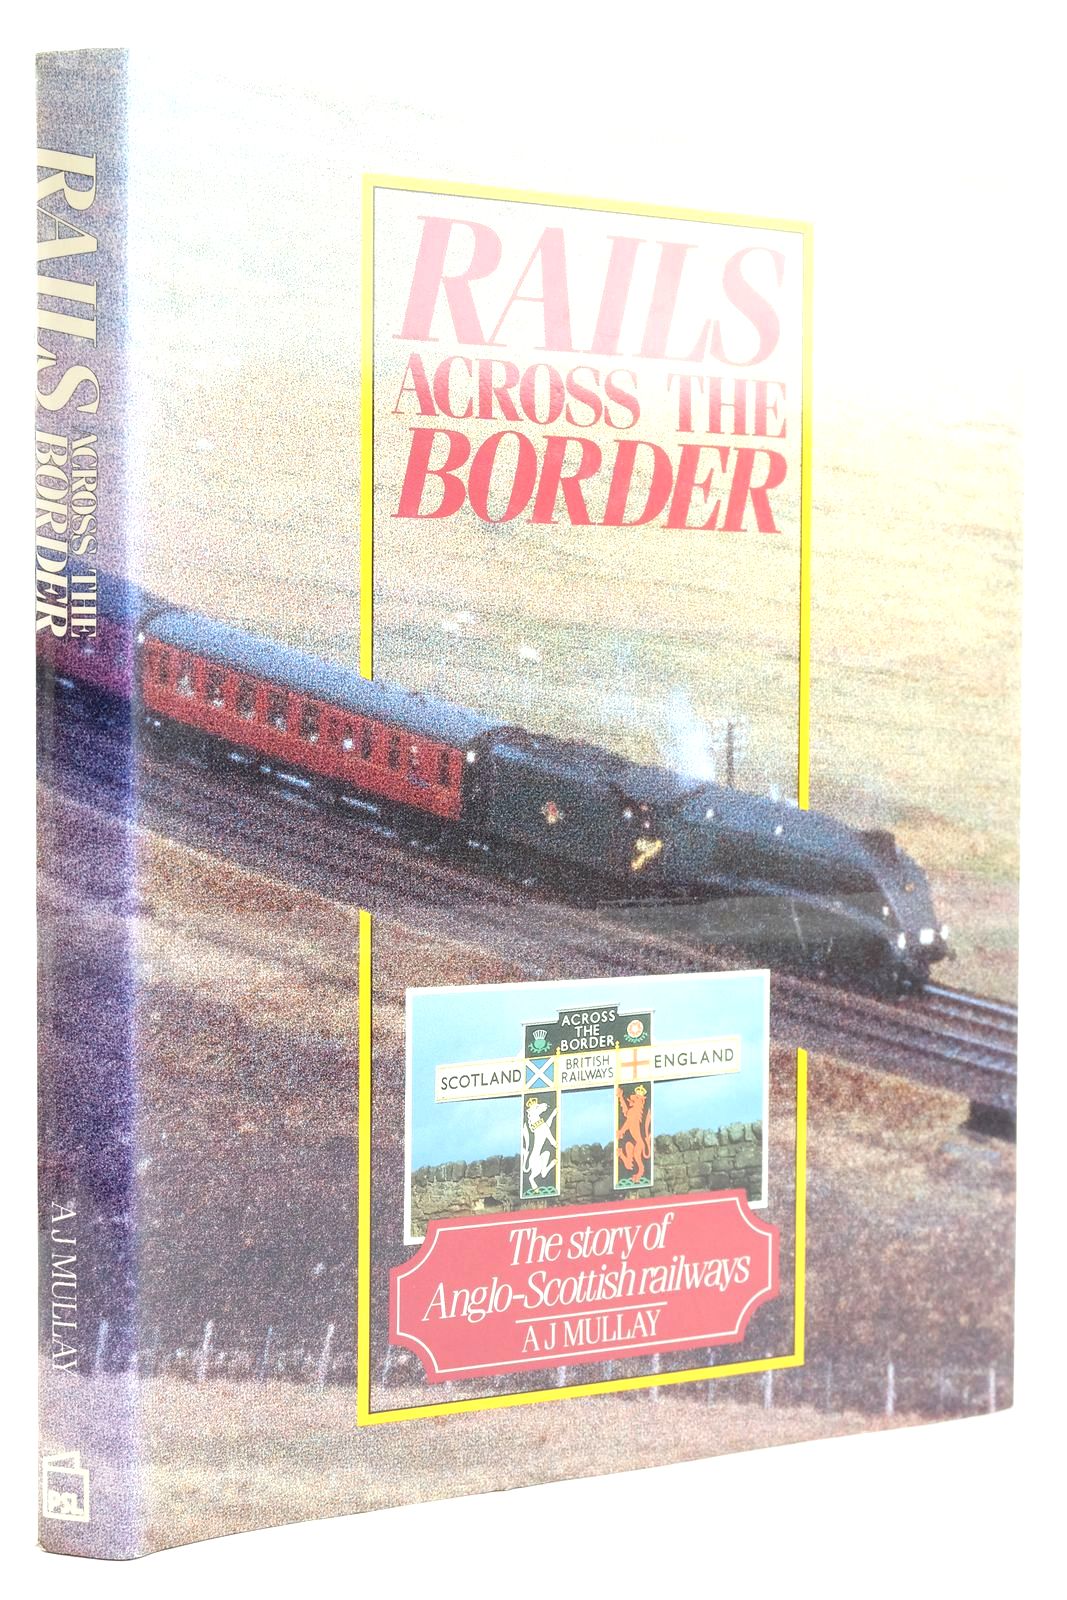 Photo of RAILS ACROSS THE BORDER THE STORY OF ANGLO-SCOTTISH RAILWAYS written by Mullay, A.J. published by Patrick Stephens Limited (STOCK CODE: 2133120)  for sale by Stella & Rose's Books